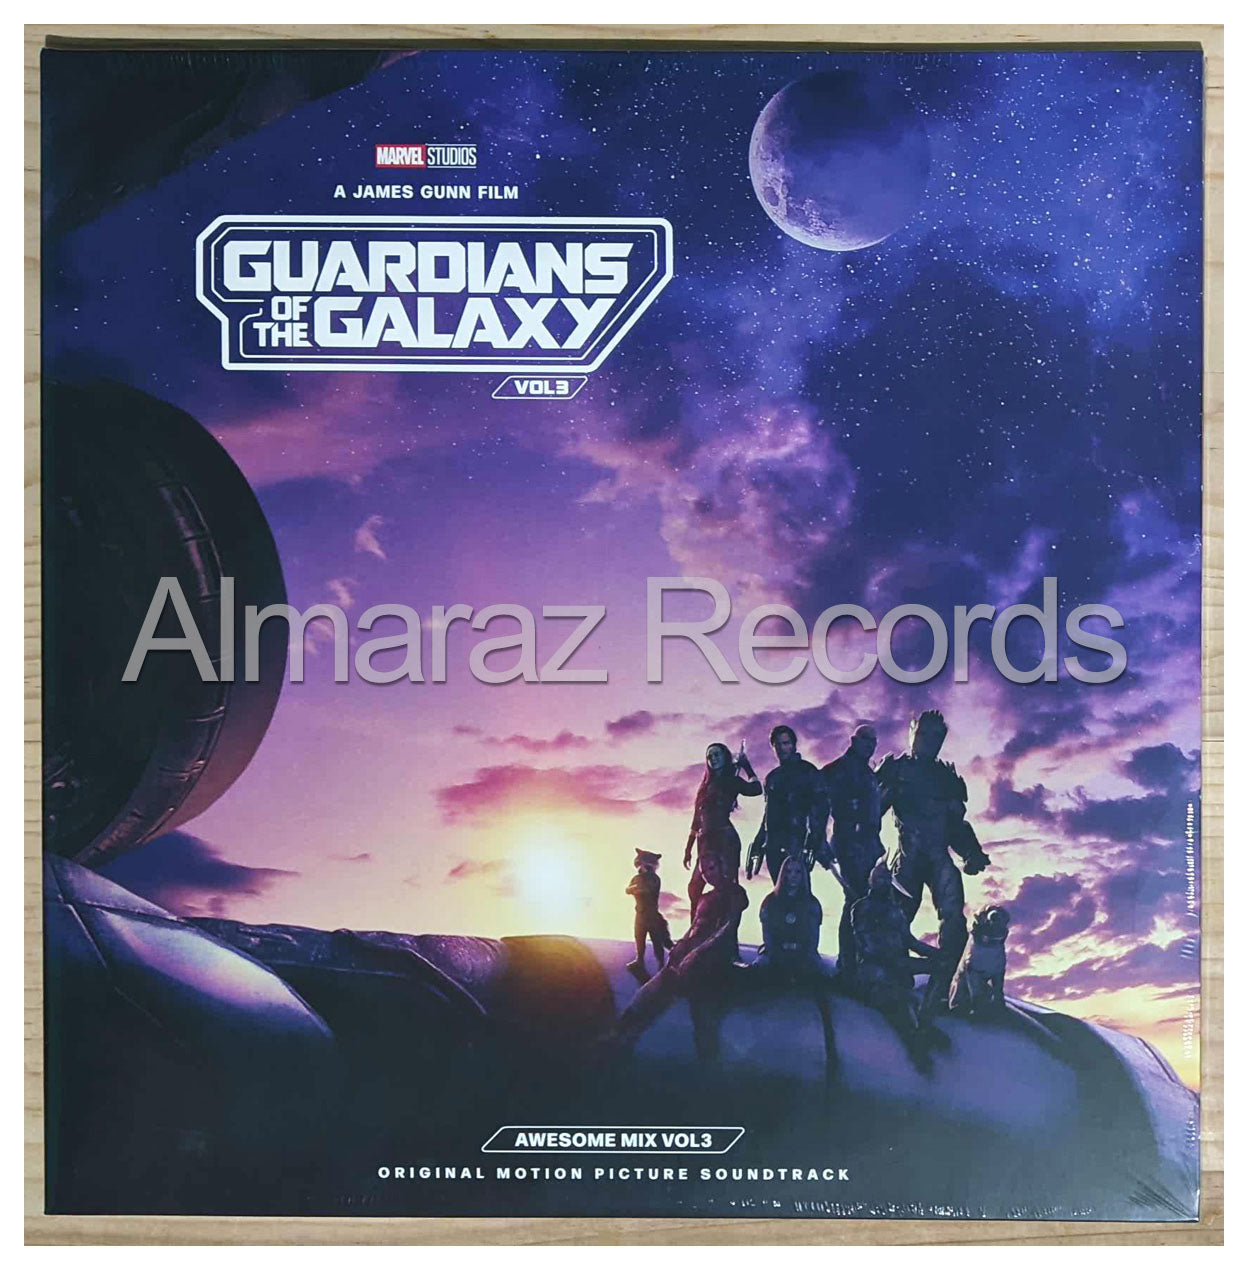 Guardians Of The Galaxy Awesome Mix Vol. 3 Vinyl LP